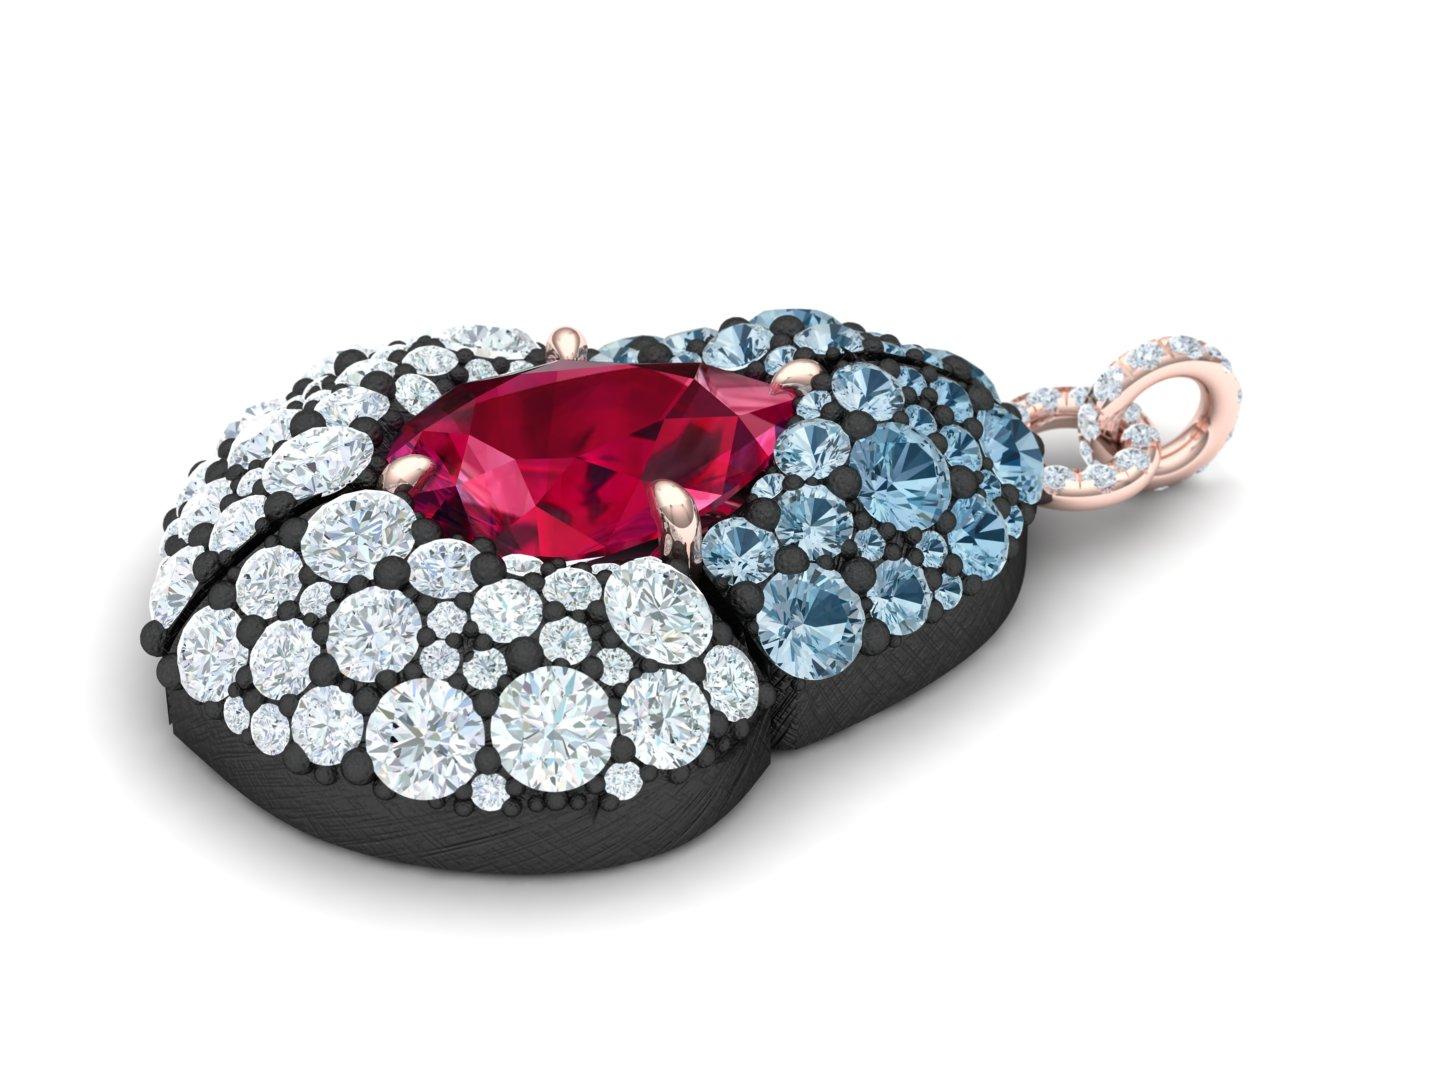 This modern twist on a classic pairs two of our favorite metals grey silver and rose gold.  The pendant is hand pierced and has a pastel gradient of light blue sapphires into white F-G VS-SI round brilliant diamonds.  This pendant is designed with